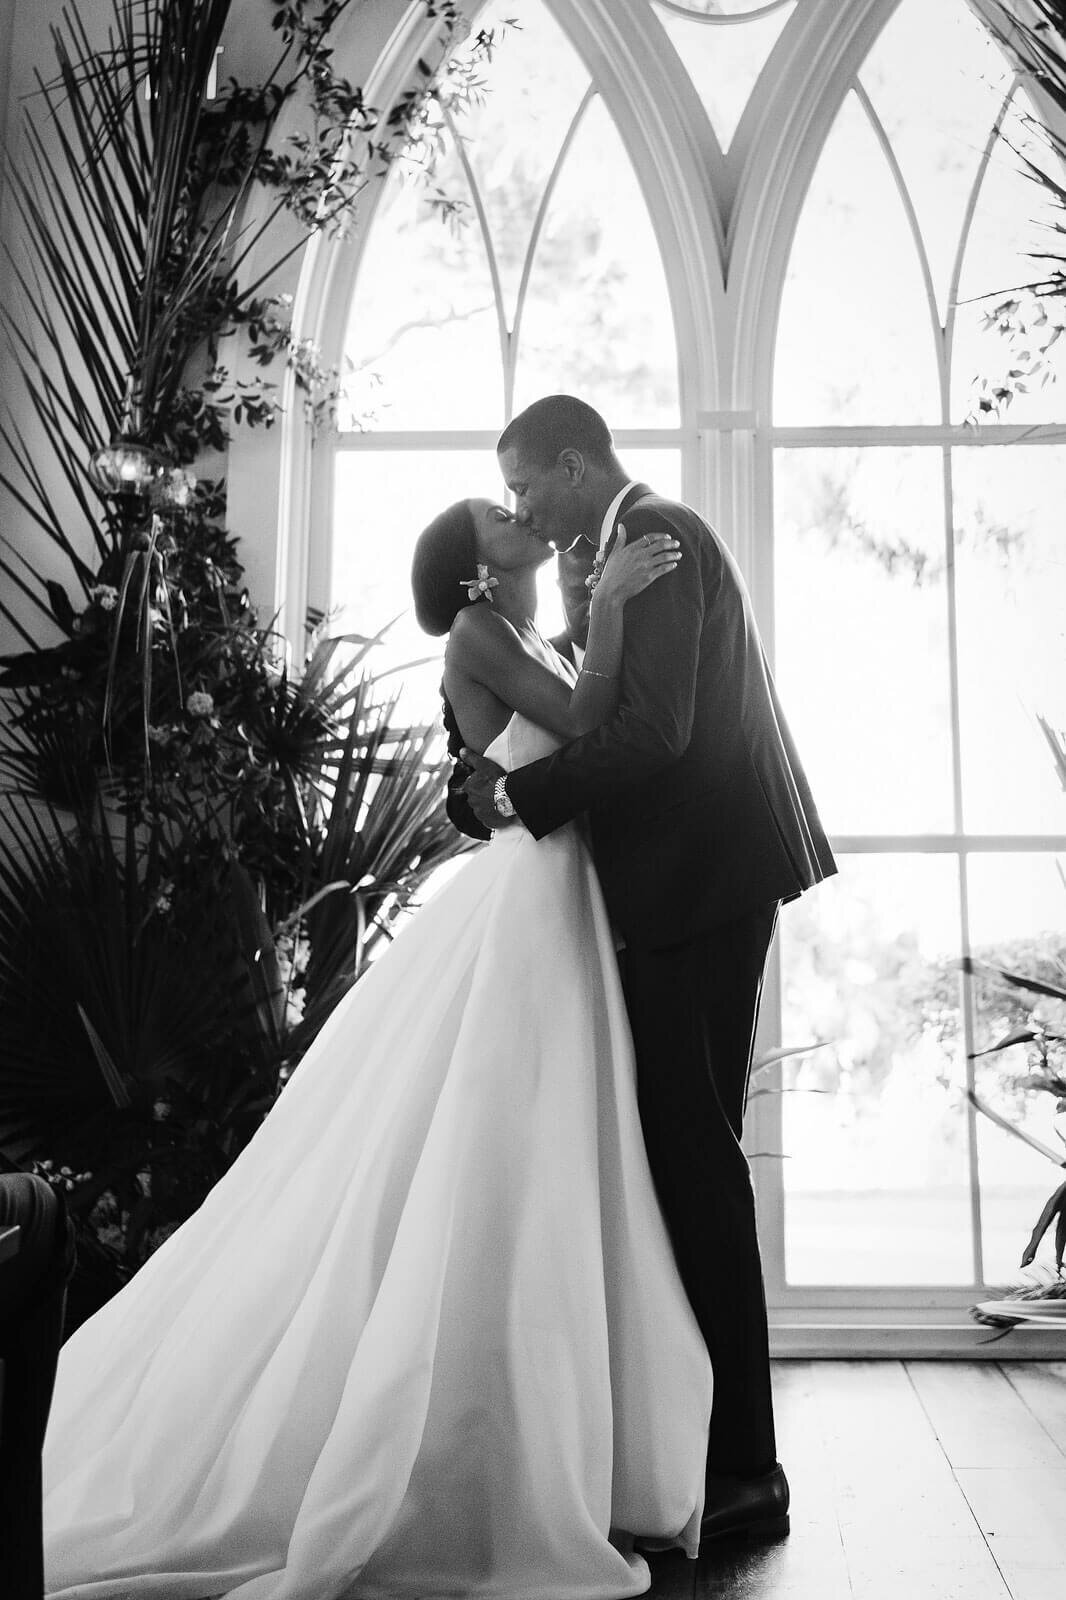 The bride and groom are kissing at the chapel altar in Montage at Palmetto Bluff. Destination wedding image by Jenny Fu Studio